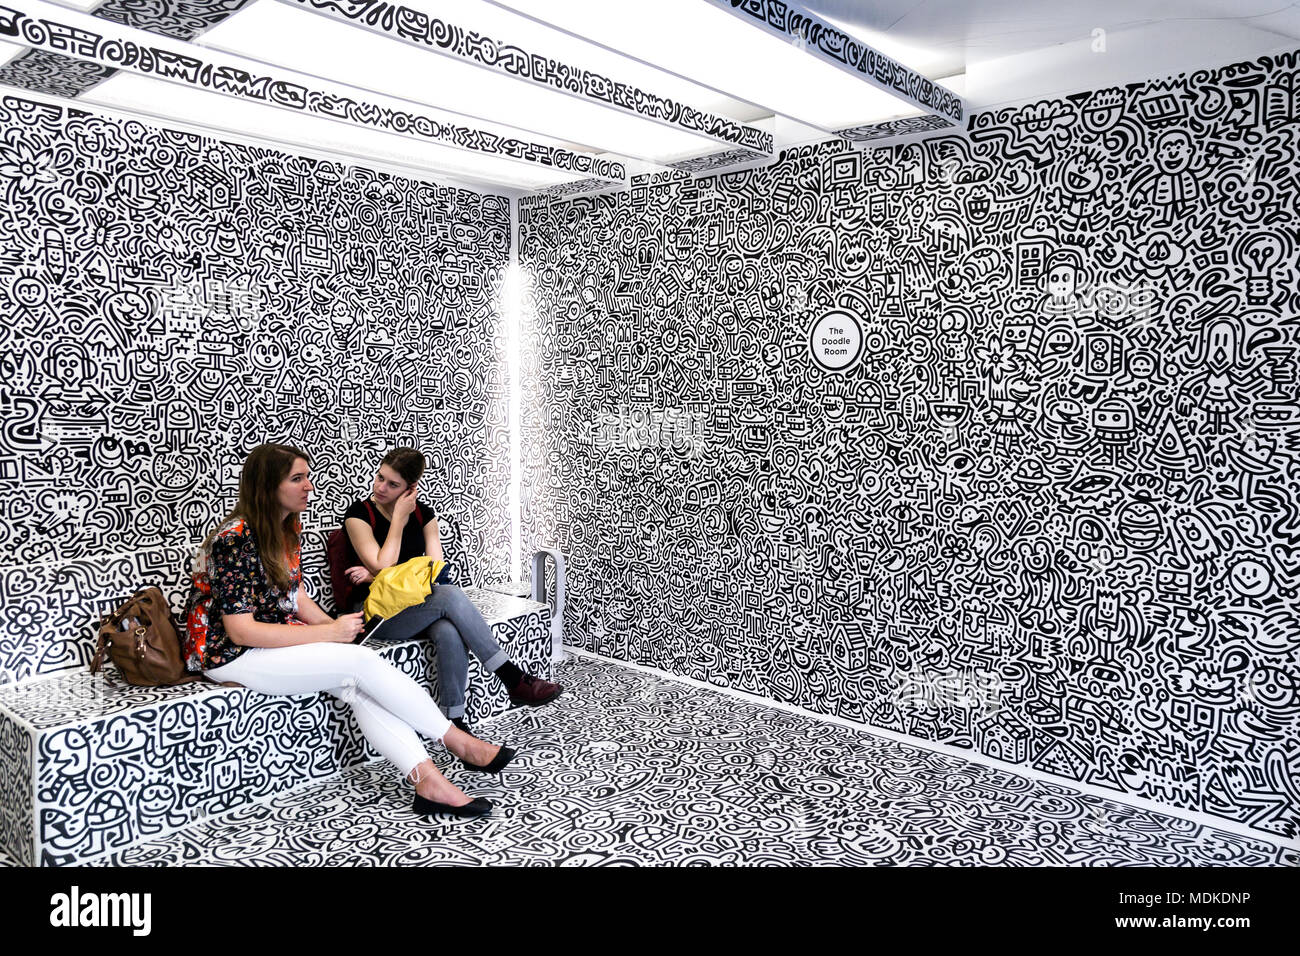 The Doodle Room By Mr Doodle In Black And White Graffiti At The